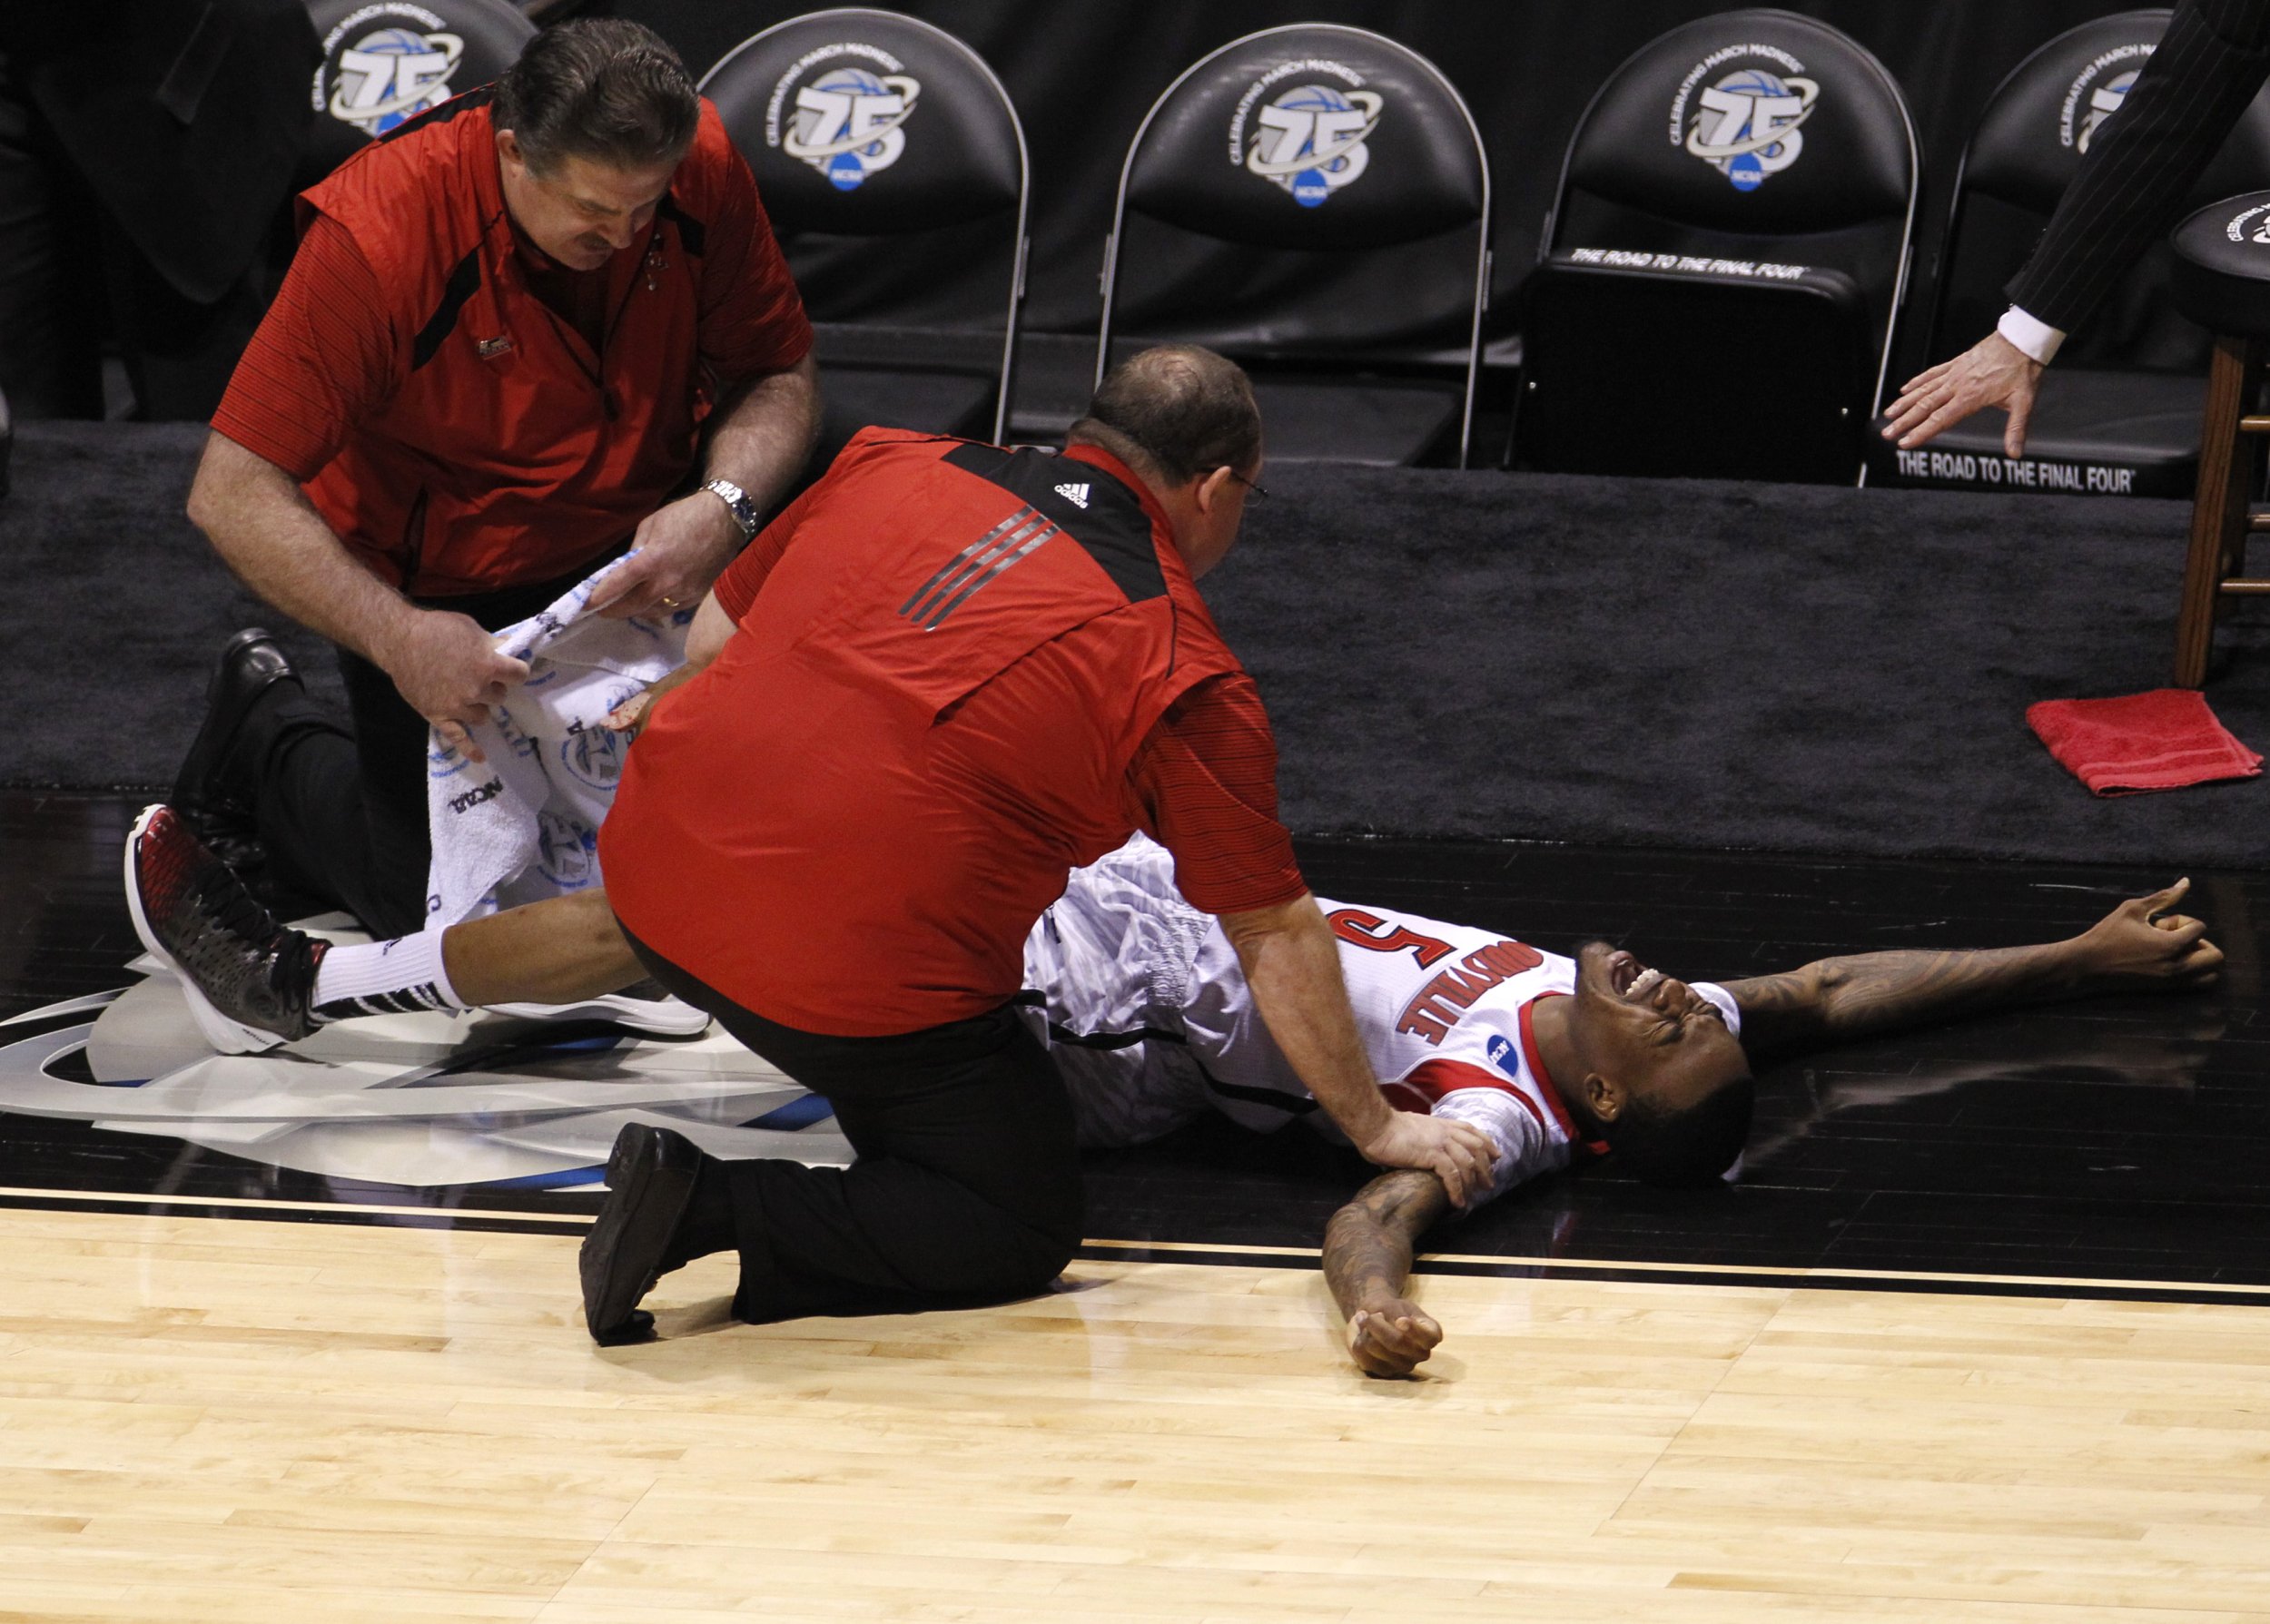 How was Kevin Ware's injury treated?